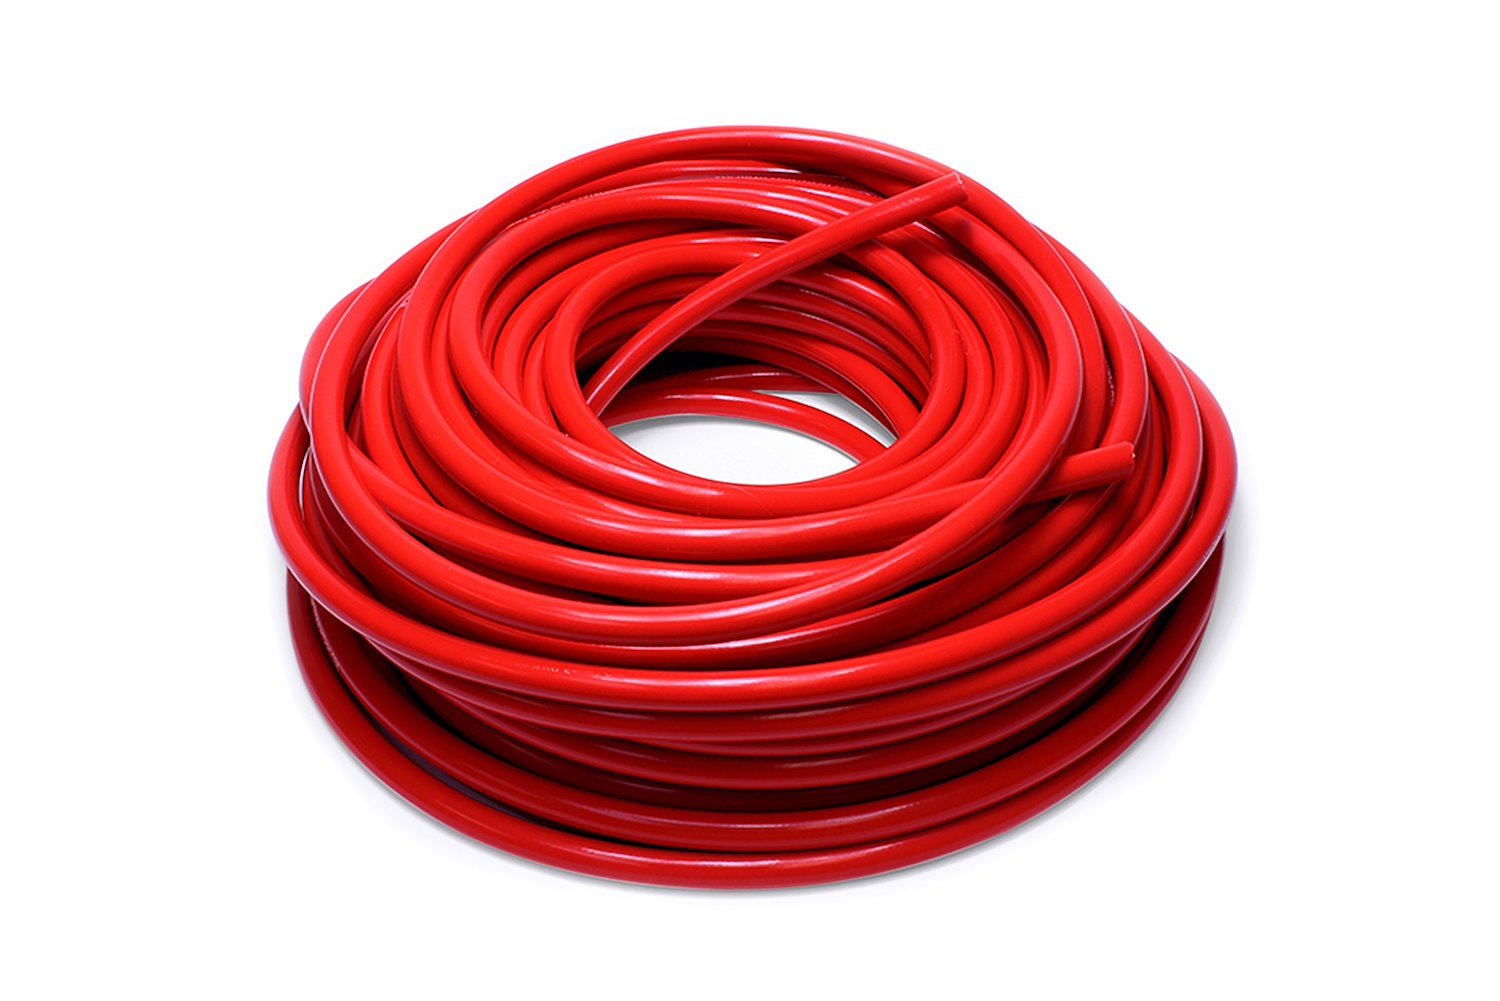 HTHH-087-REDx100 Silicone Heater Hose Tubing, High-Temp 1-Ply Reinforced, 7/8 in. ID, 100 ft. Roll, Red